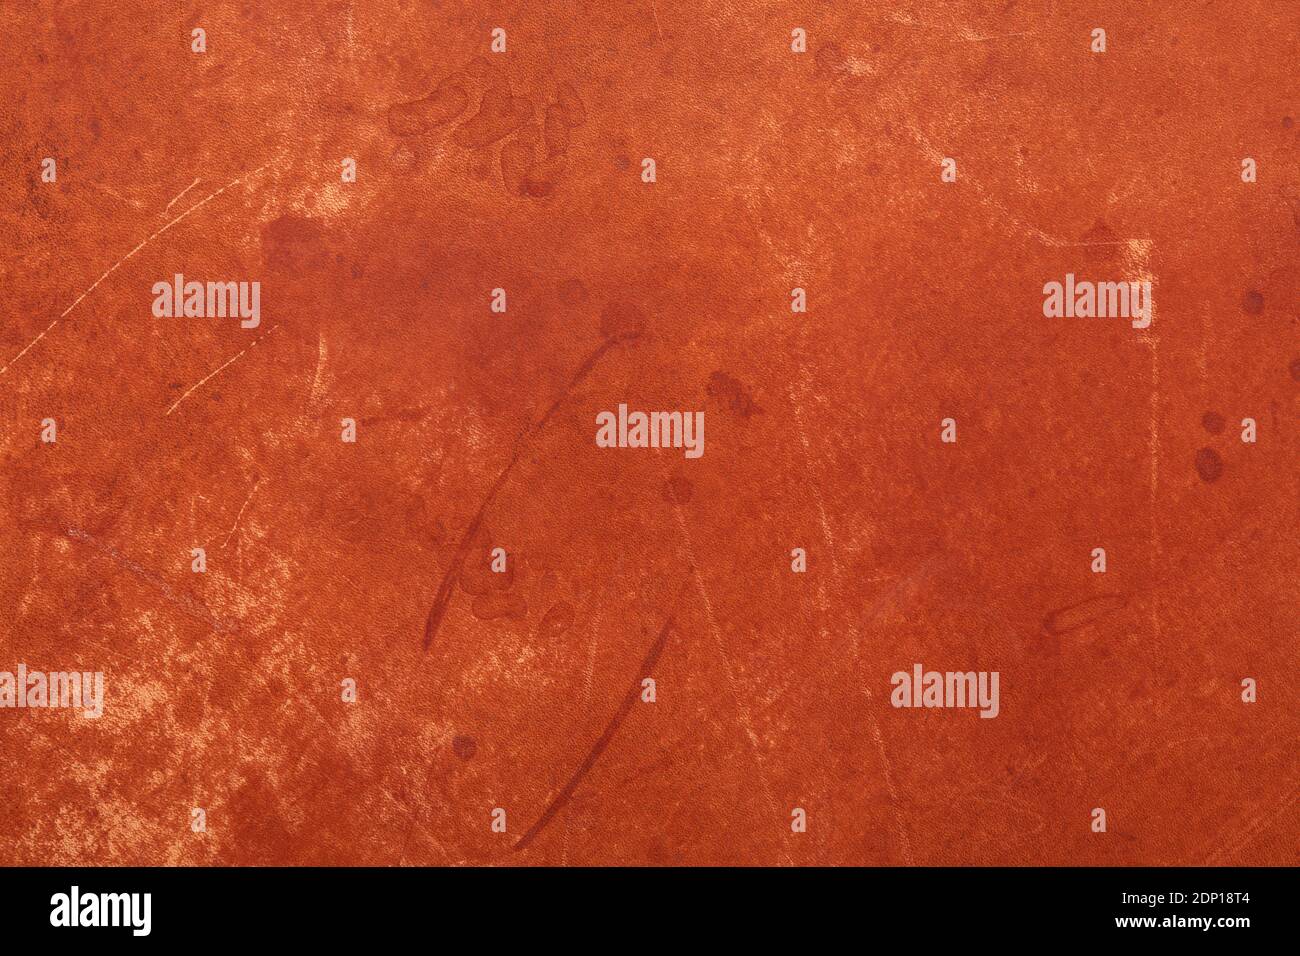 Brown, stained and faded leather texture background with scratches Stock Photo